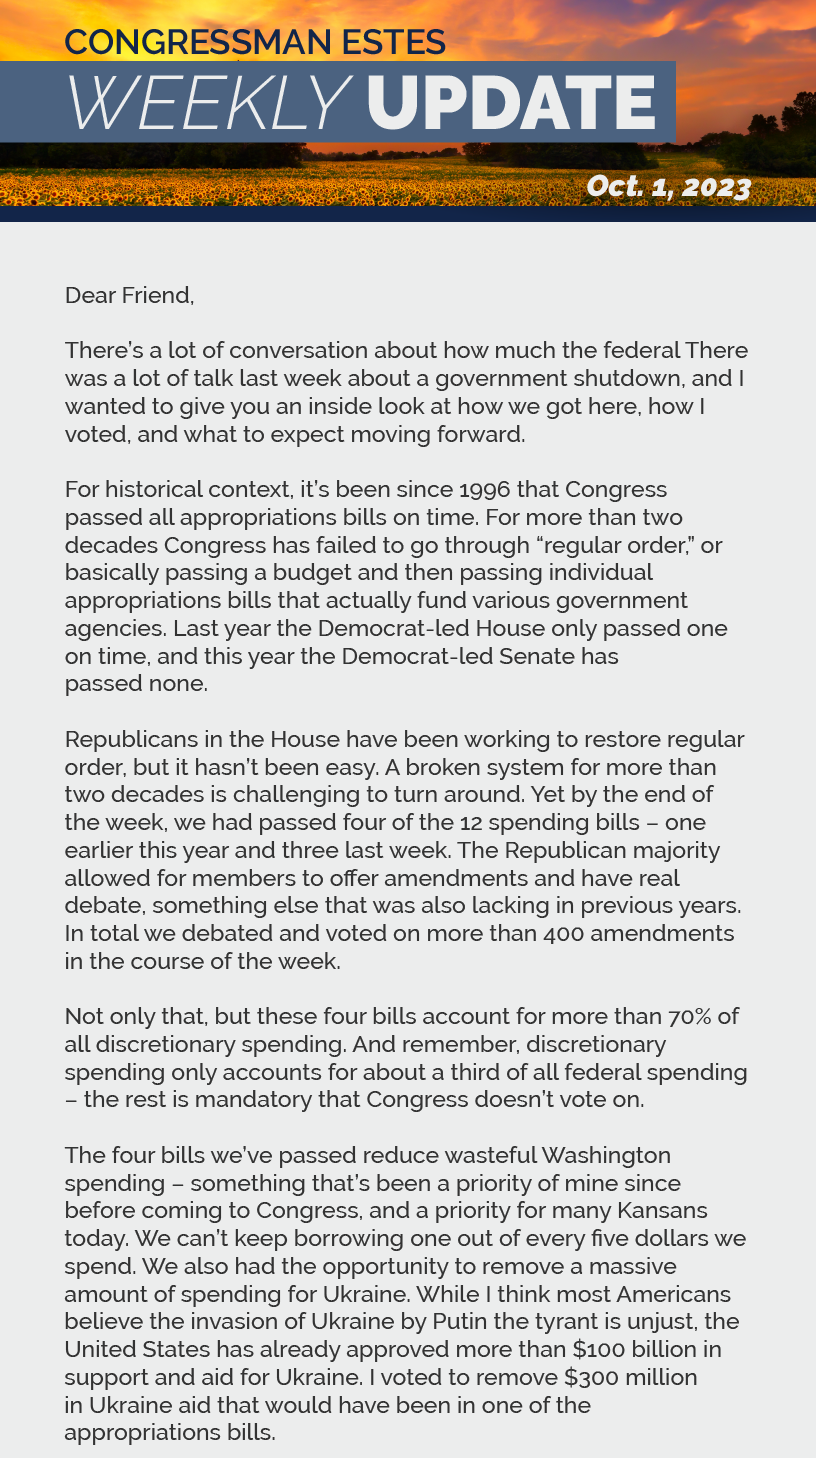 Dear Friend,  There was a lot of talk last week about a government shutdown, and I wanted to give you an inside look at how we got here, how I voted, and what to expect moving forward.  For historical context, it’s been since 1996 that Congress passed all appropriations bills on time. For more than two decades Congress has failed to go through “regular order,” or basically passing a budget and then passing individual appropriations bills that actually fund various government agencies. Last year the Democrat-led House only passed one on time, and this year the Democrat-led Senate has passed none.  Republicans in the House have been working to restore regular order, but it hasn’t been easy. A broken system for more than two decades is challenging to turn around. Yet by the end of the week, we had passed four of the 12 spending bills – one earlier this year and three last week. The Republican majority allowed for members to offer amendments and have real debate, something else that was also lacking in previous years. In total we debated and voted on more than 400 amendments in the course of the week.   Not only that, but these four bills account for more than 70% of all discretionary spending. And remember, discretionary spending only accounts for about a third of all federal spending – the rest is mandatory that Congress doesn’t vote on.  The four bills we’ve passed reduce wasteful Washington spending – something that’s been a priority of mine since before coming to Congress, and a priority for many Kansans today. We can’t keep borrowing one out of every five dollars we spend. We also had the opportunity to remove a massive amount of spending for Ukraine. While I think most Americans believe the invasion of Ukraine by Putin the tyrant is unjust, the United States has already approved more than $100 billion in support and aid for Ukraine. I voted to remove $300 million in Ukraine aid that would have been in one of the appropriations bills.